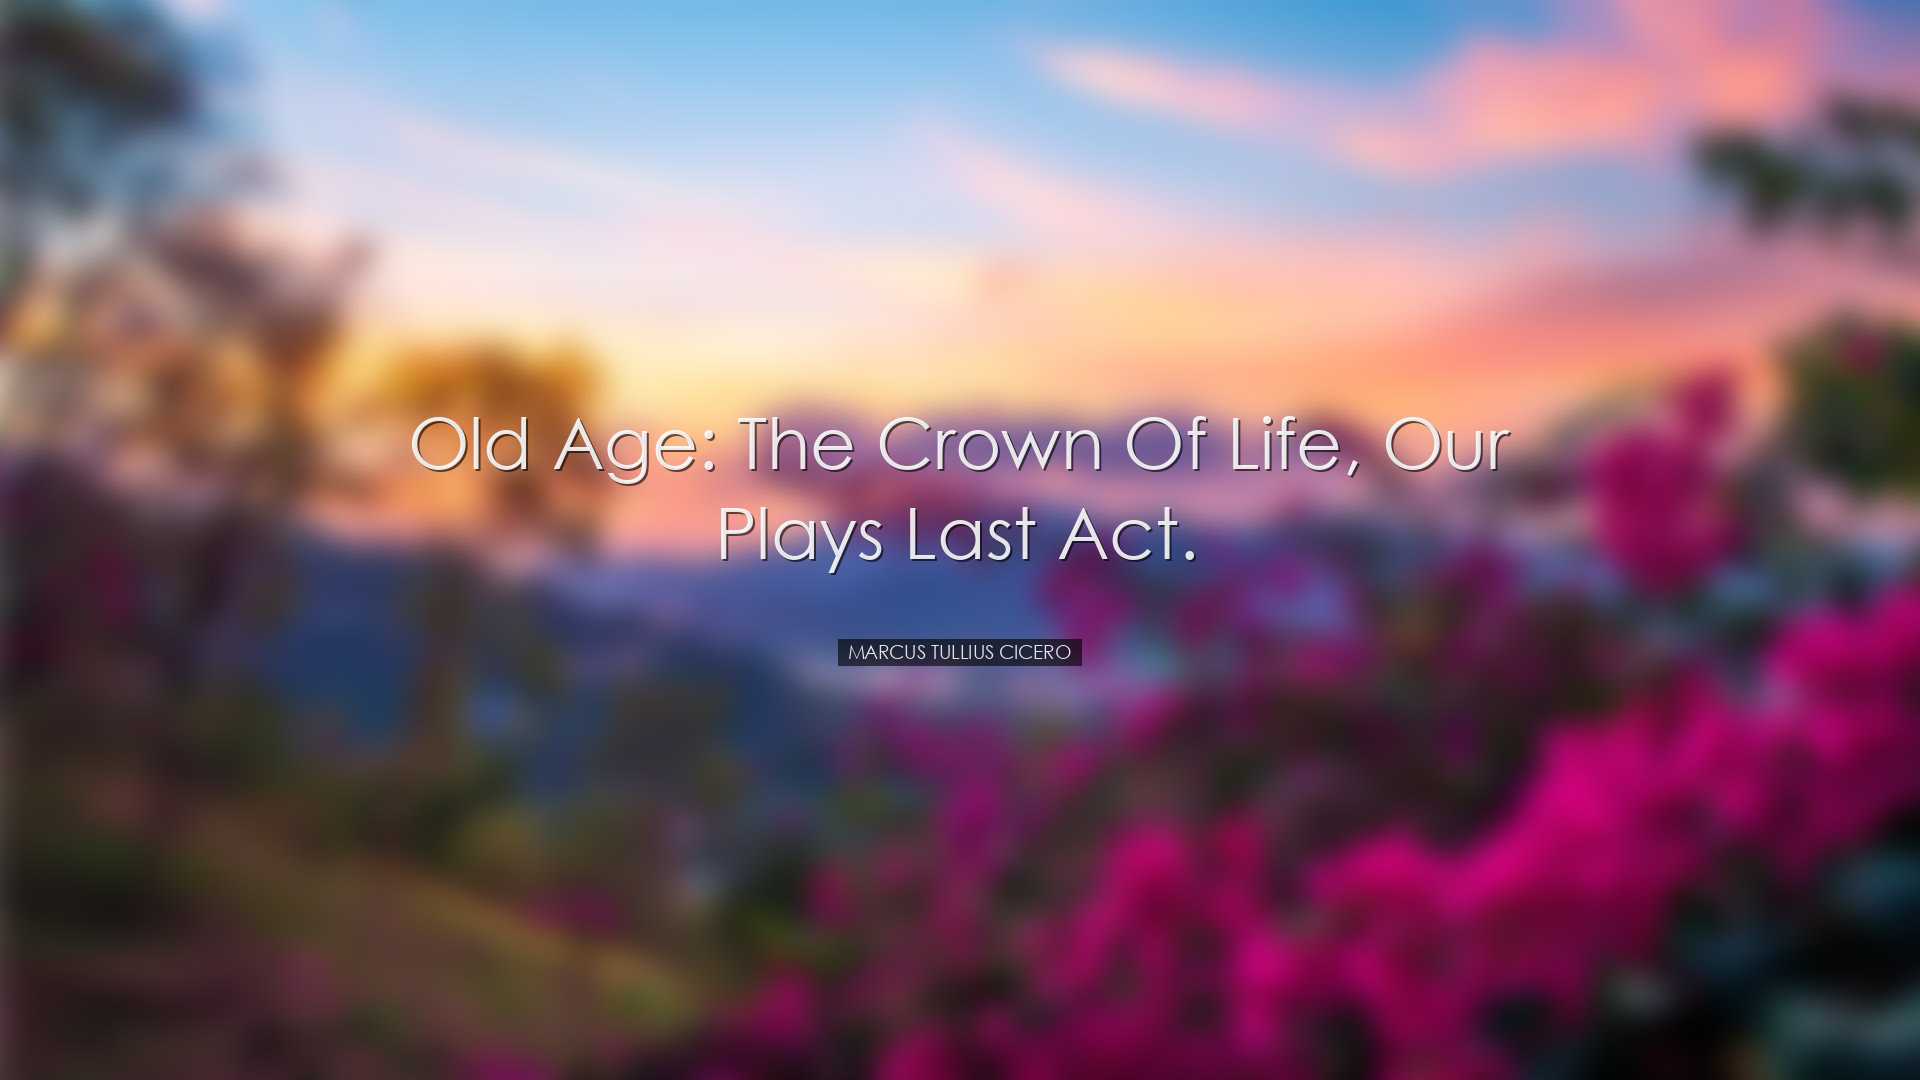 Old age: the crown of life, our plays last act. - Marcus Tullius C